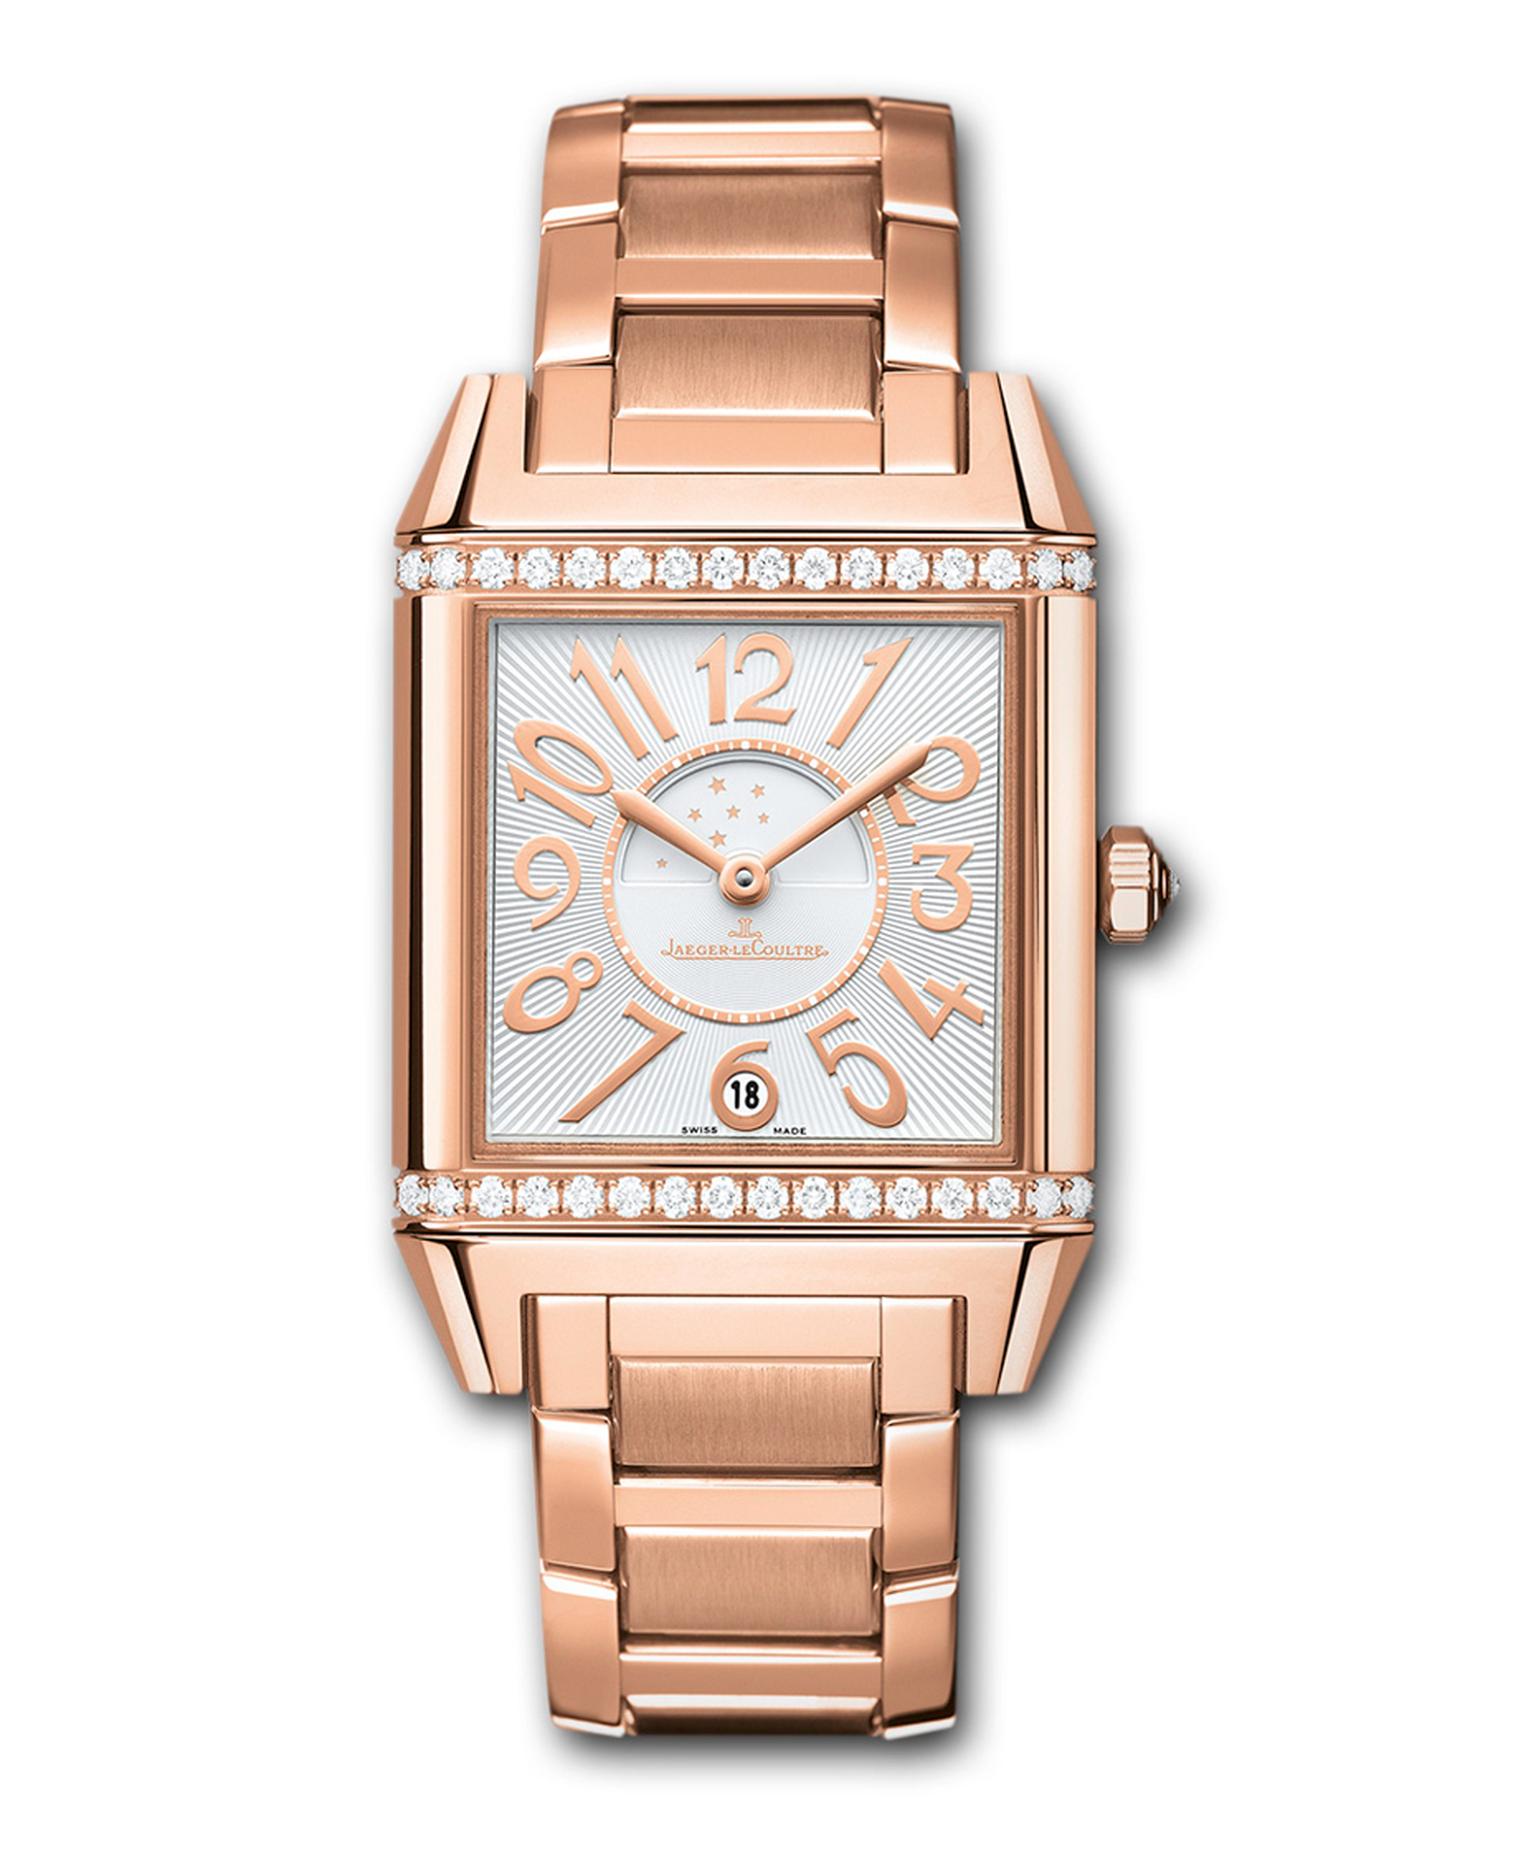 The Jaeger-LeCoultre Reverso Squadra Lady Duetto watch is just that: a square rendition of the classic rectangular Reverso. The front dial of the pink gold model features a diamond-set bezel, a silver guillochéd dial, golden numerals and a date display an